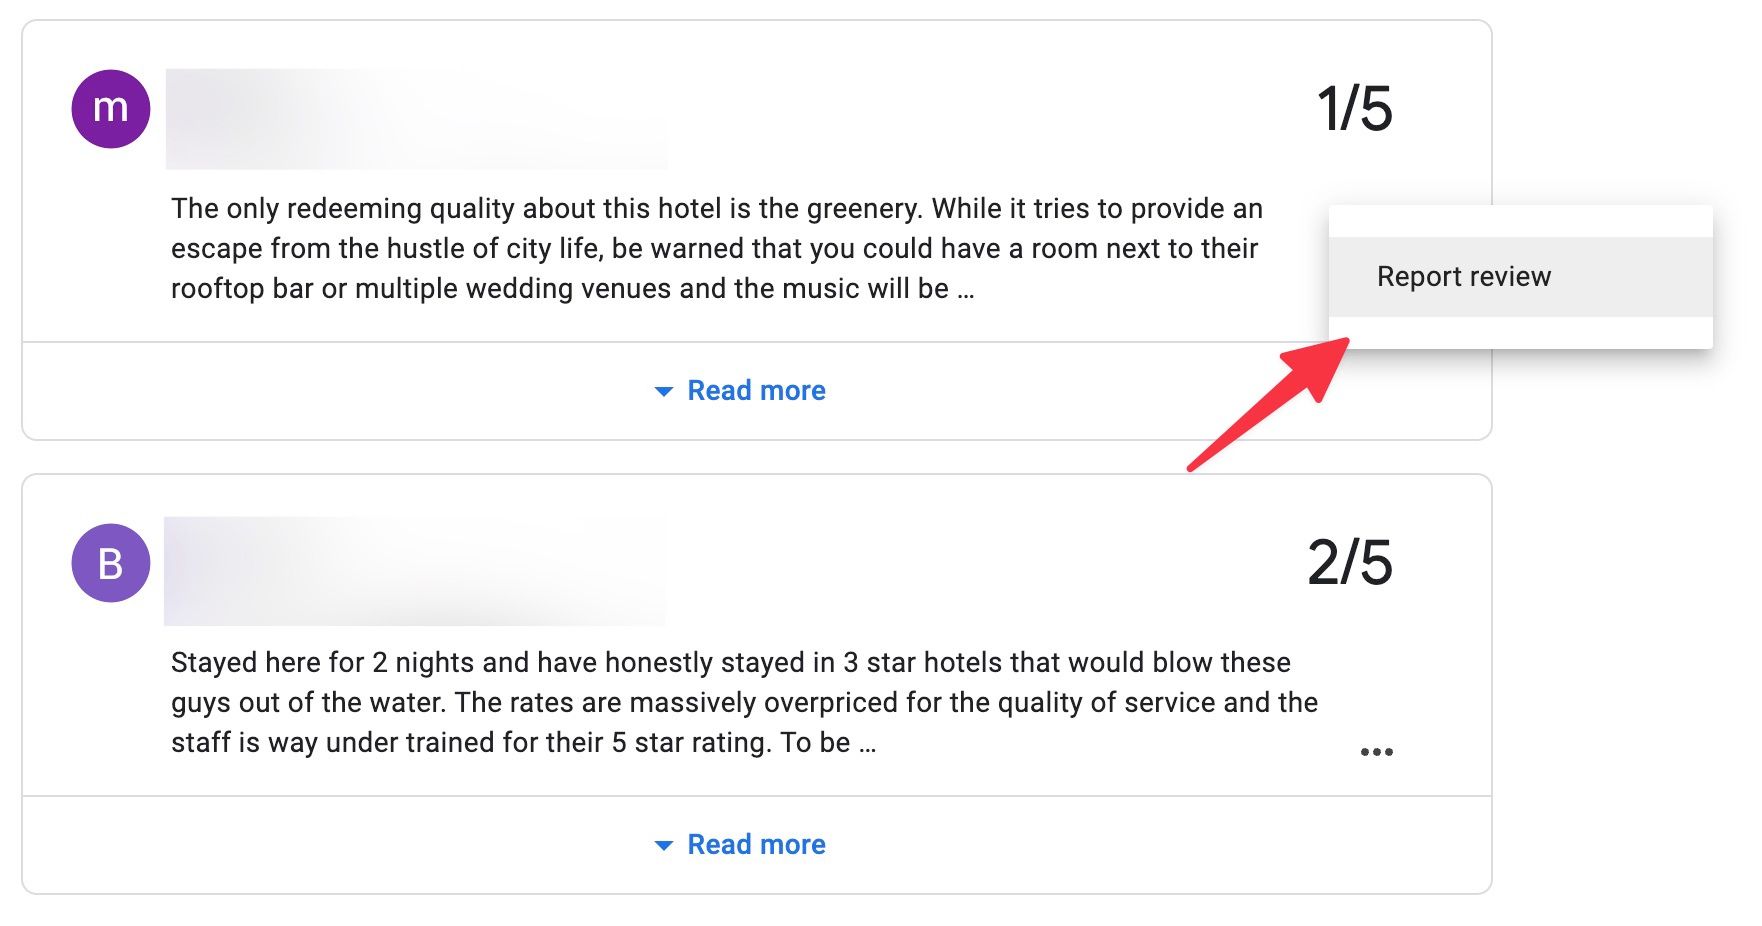 A screenshot showing two negative reviews. A red arrow is pointing at the ‘report review’ button, which is open on the mid-top right part of the screen.